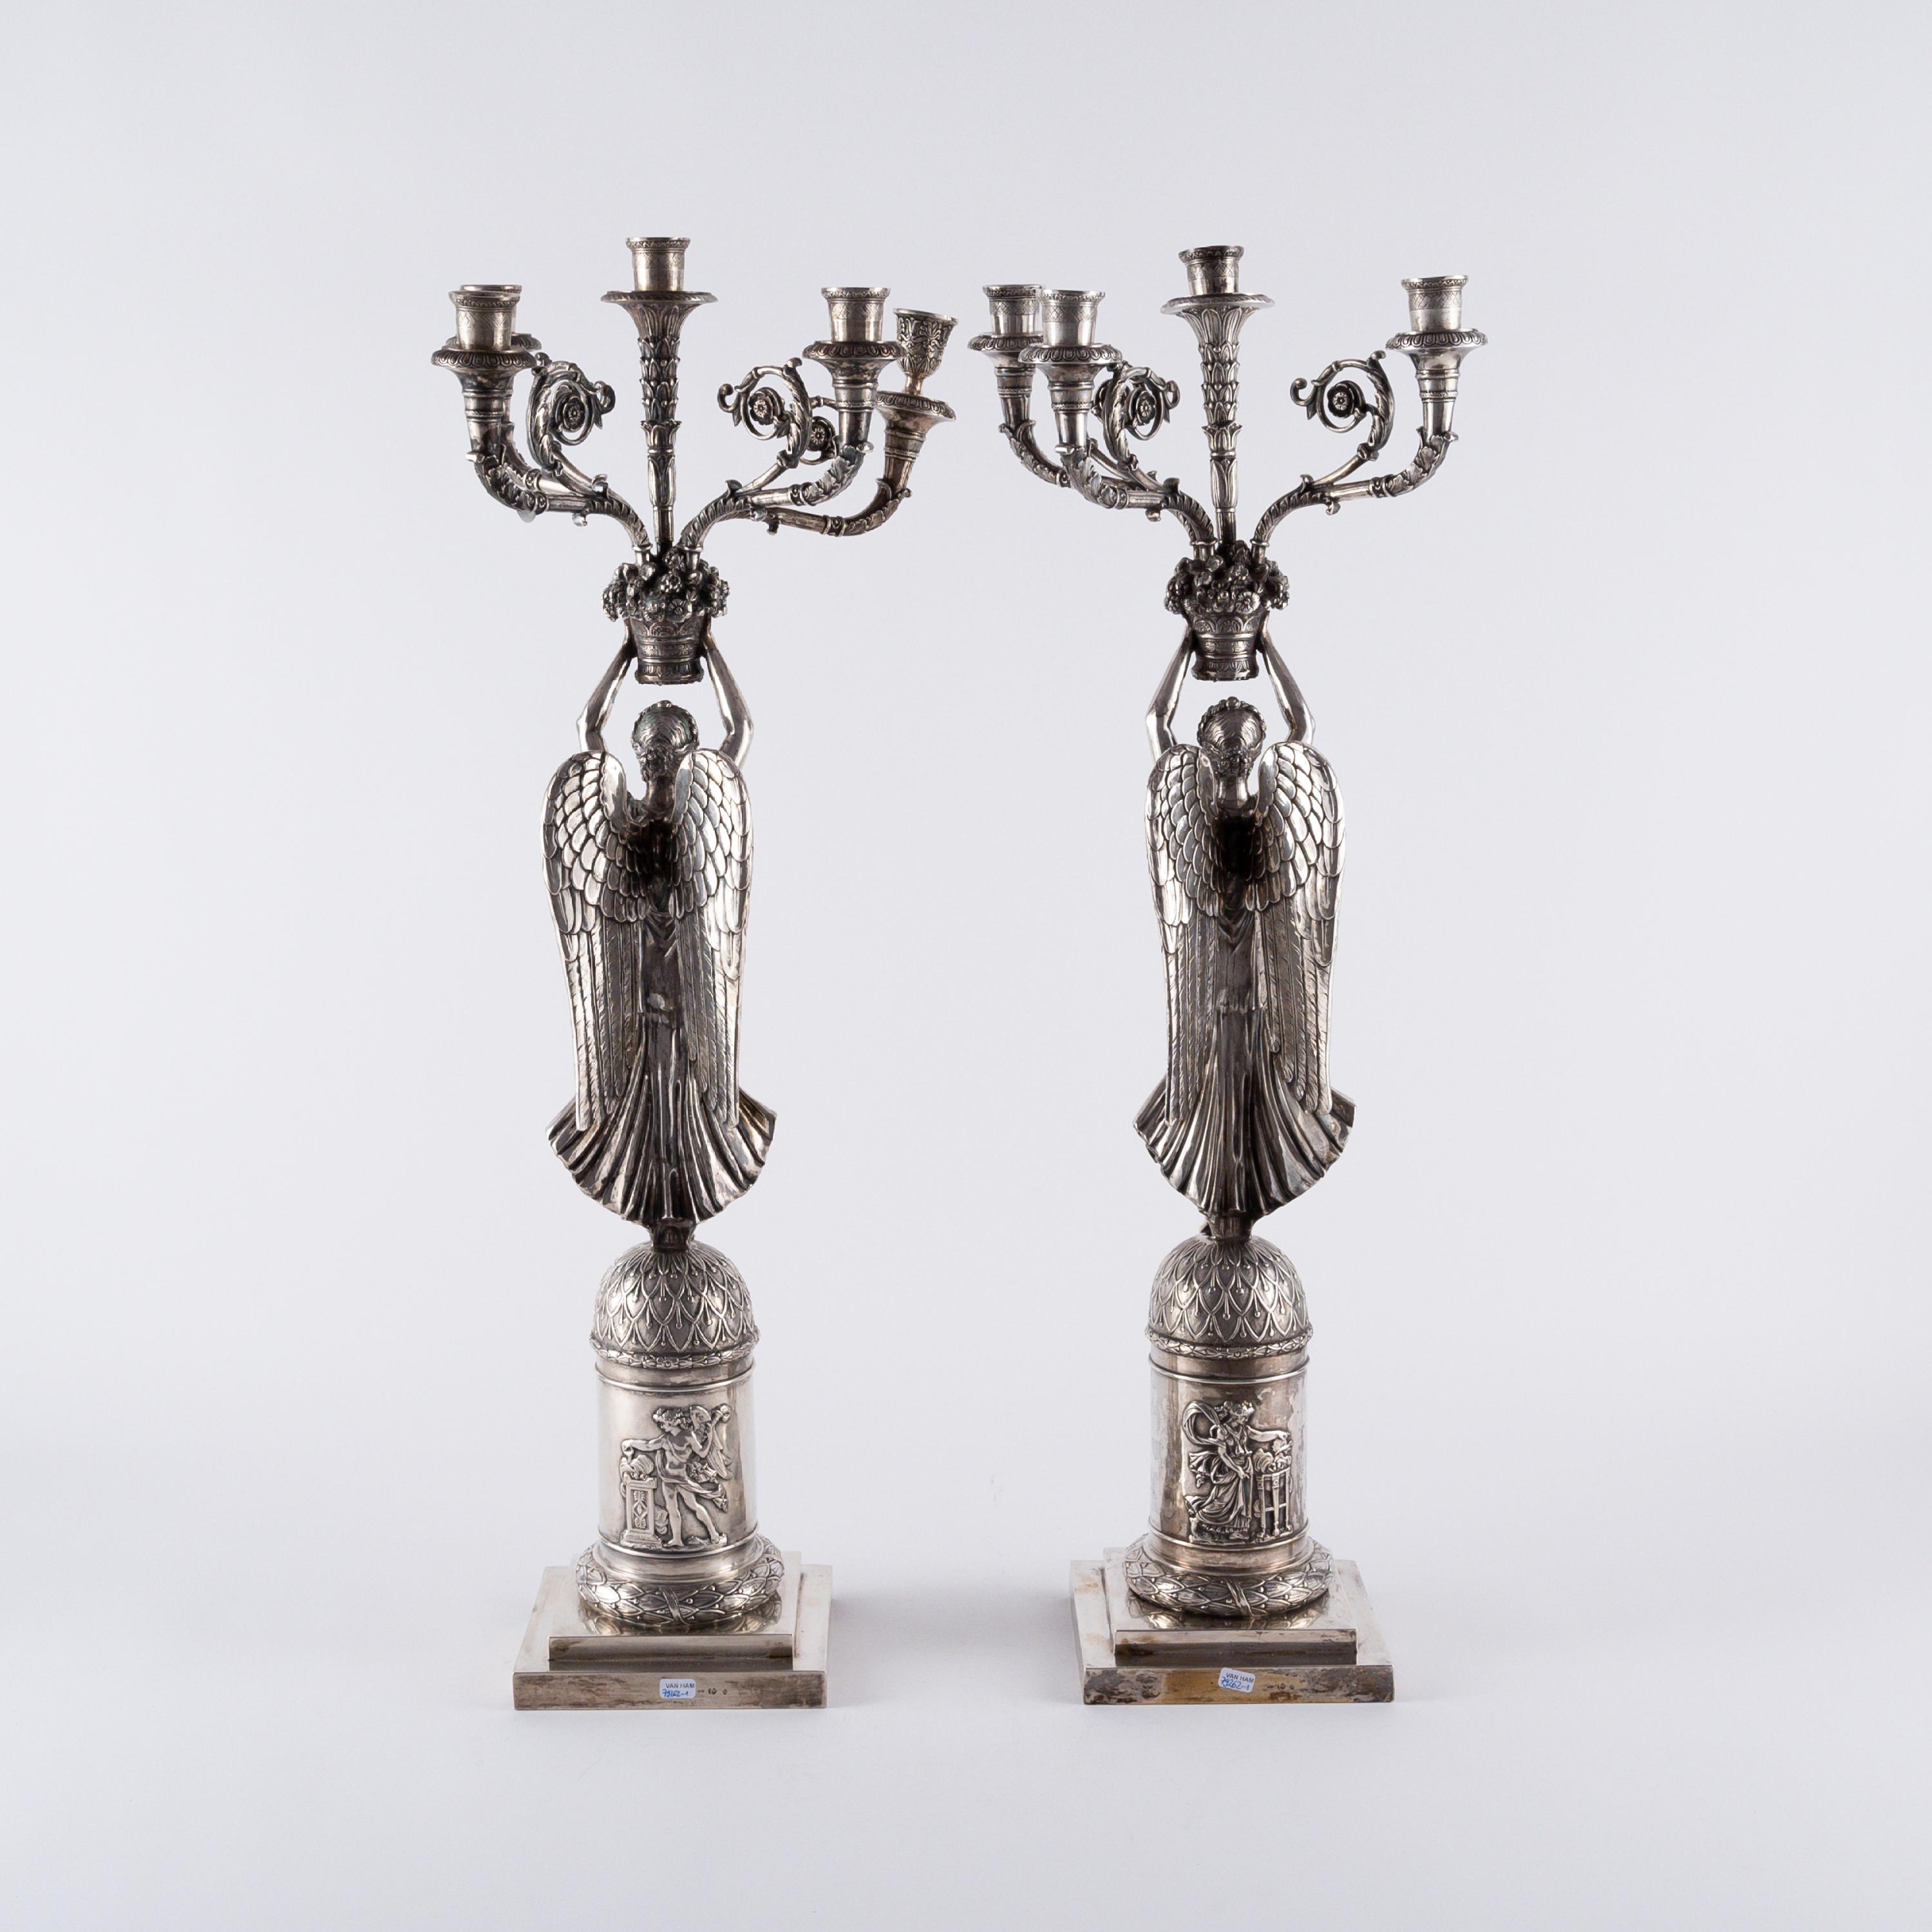 COUPLE OF EXCEPTIONAL SILVER GIRNANDOLES WITH VICTORIAN STYLE EMPIRE - Image 4 of 8